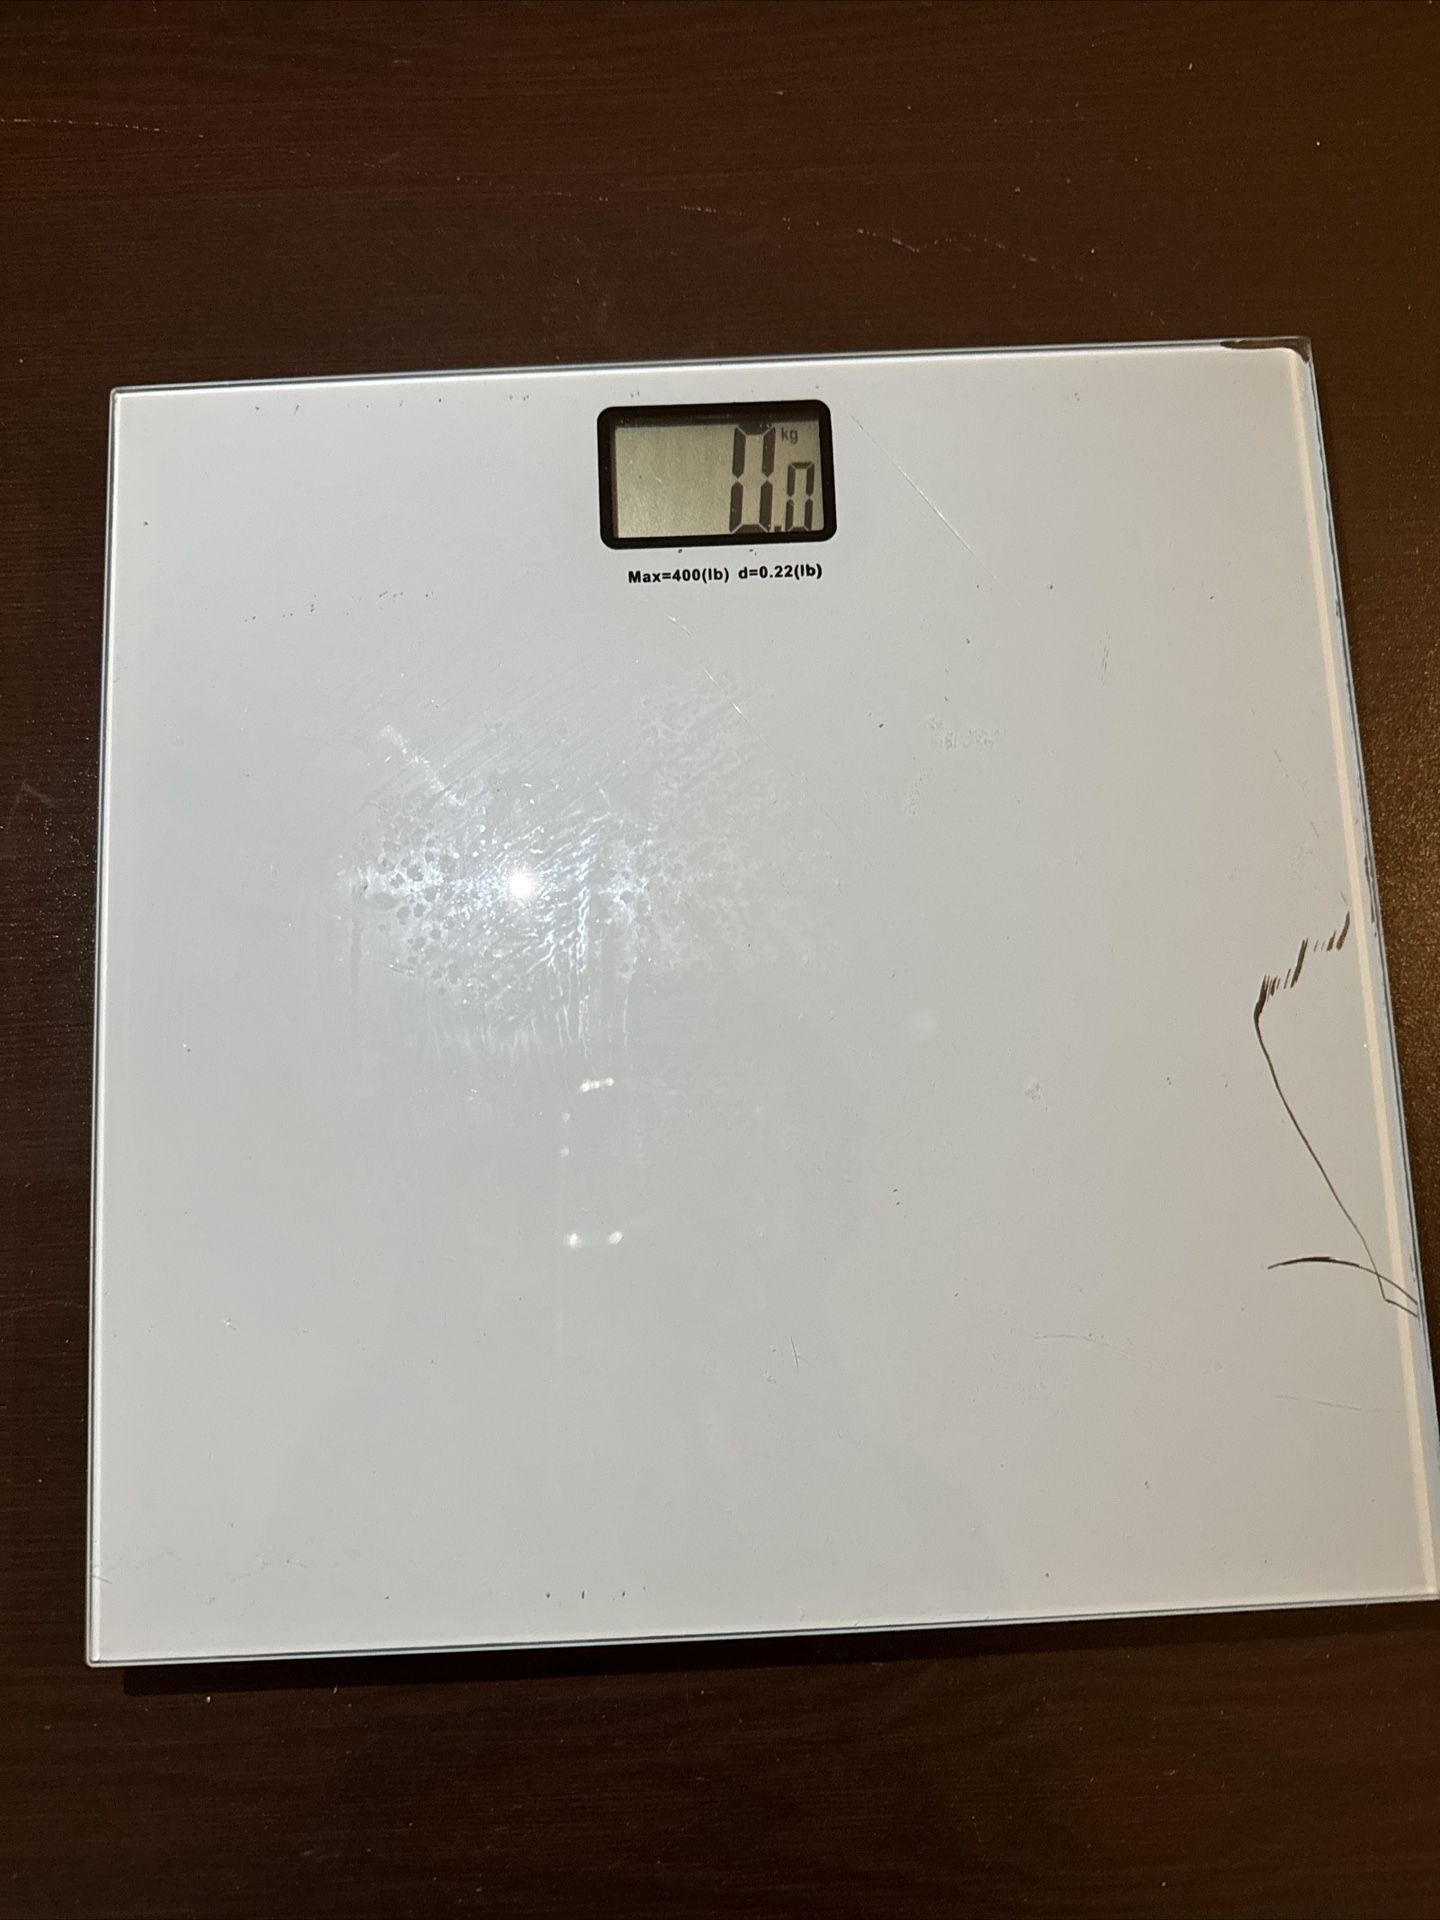 Digital Body Weight Scale Bathroom Weighing Scale for People with Large LED ...